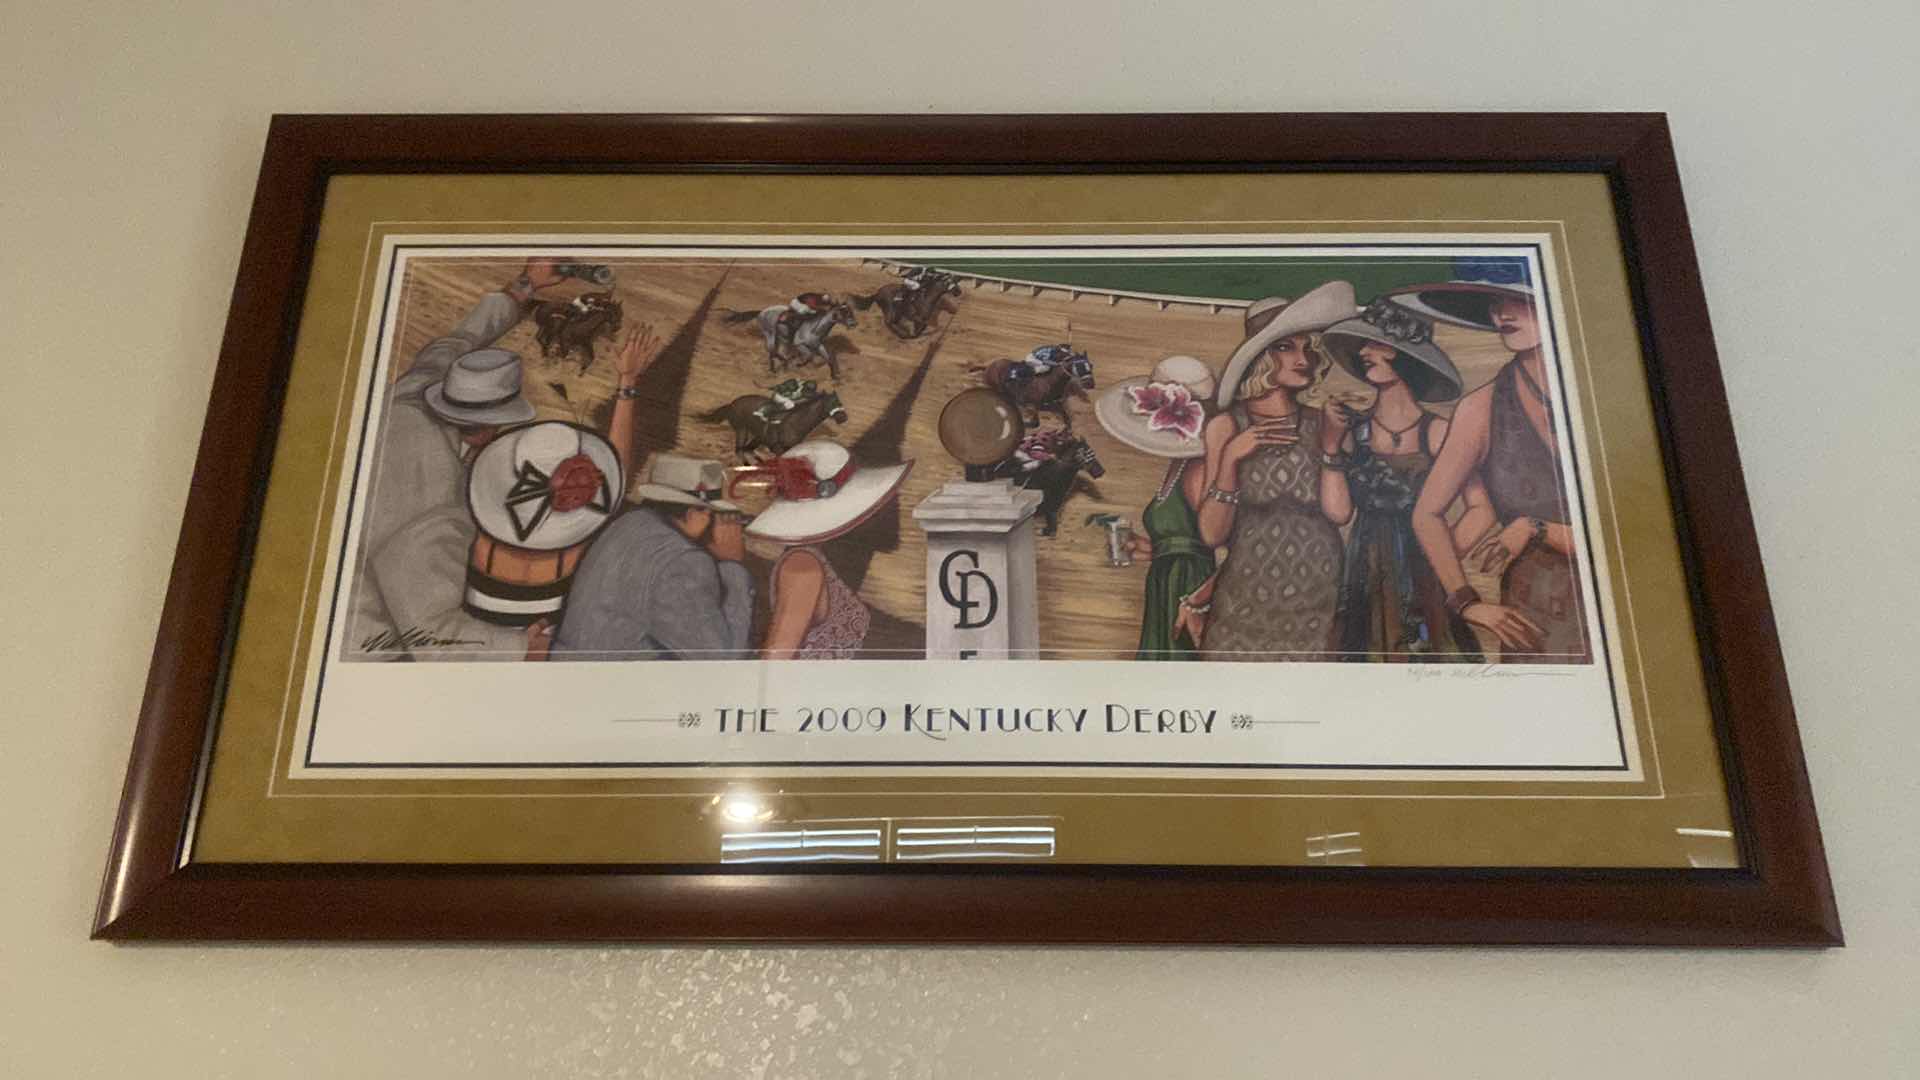 Photo 1 of FRAMED PRINT “THE 2000 KENTUCKY DERBY” SIGNED 40/200 ARTWORK 43 1/2” x 25”